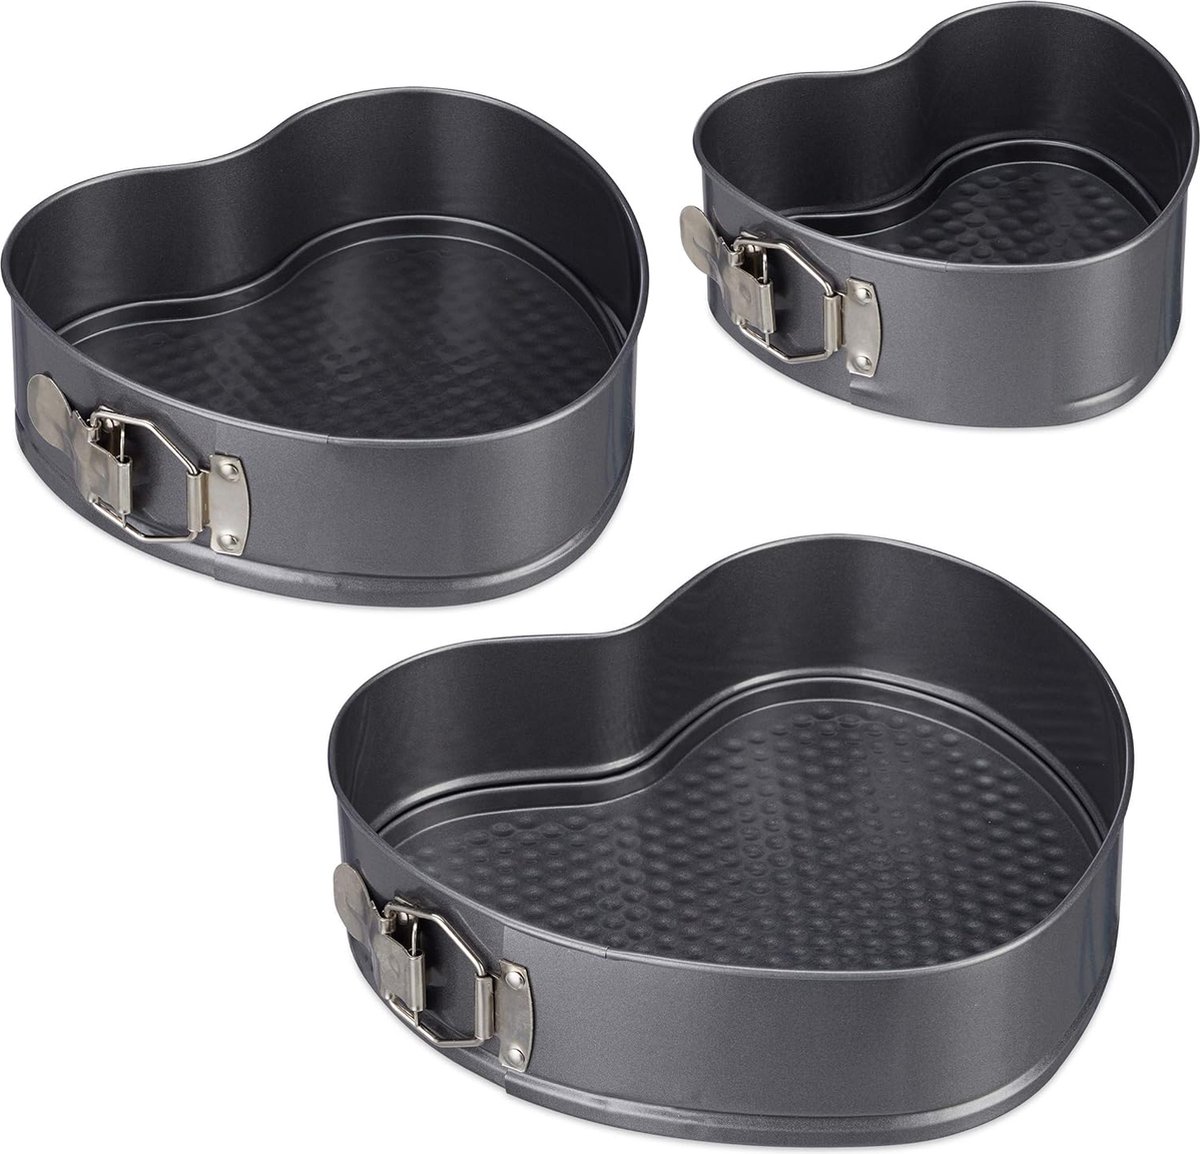 Heart Baking Mould Set of 3 Romantic Cakes & Cakes 3 Sizes Non-Stick Coating Spring Mould Carbon Steel Anthracite